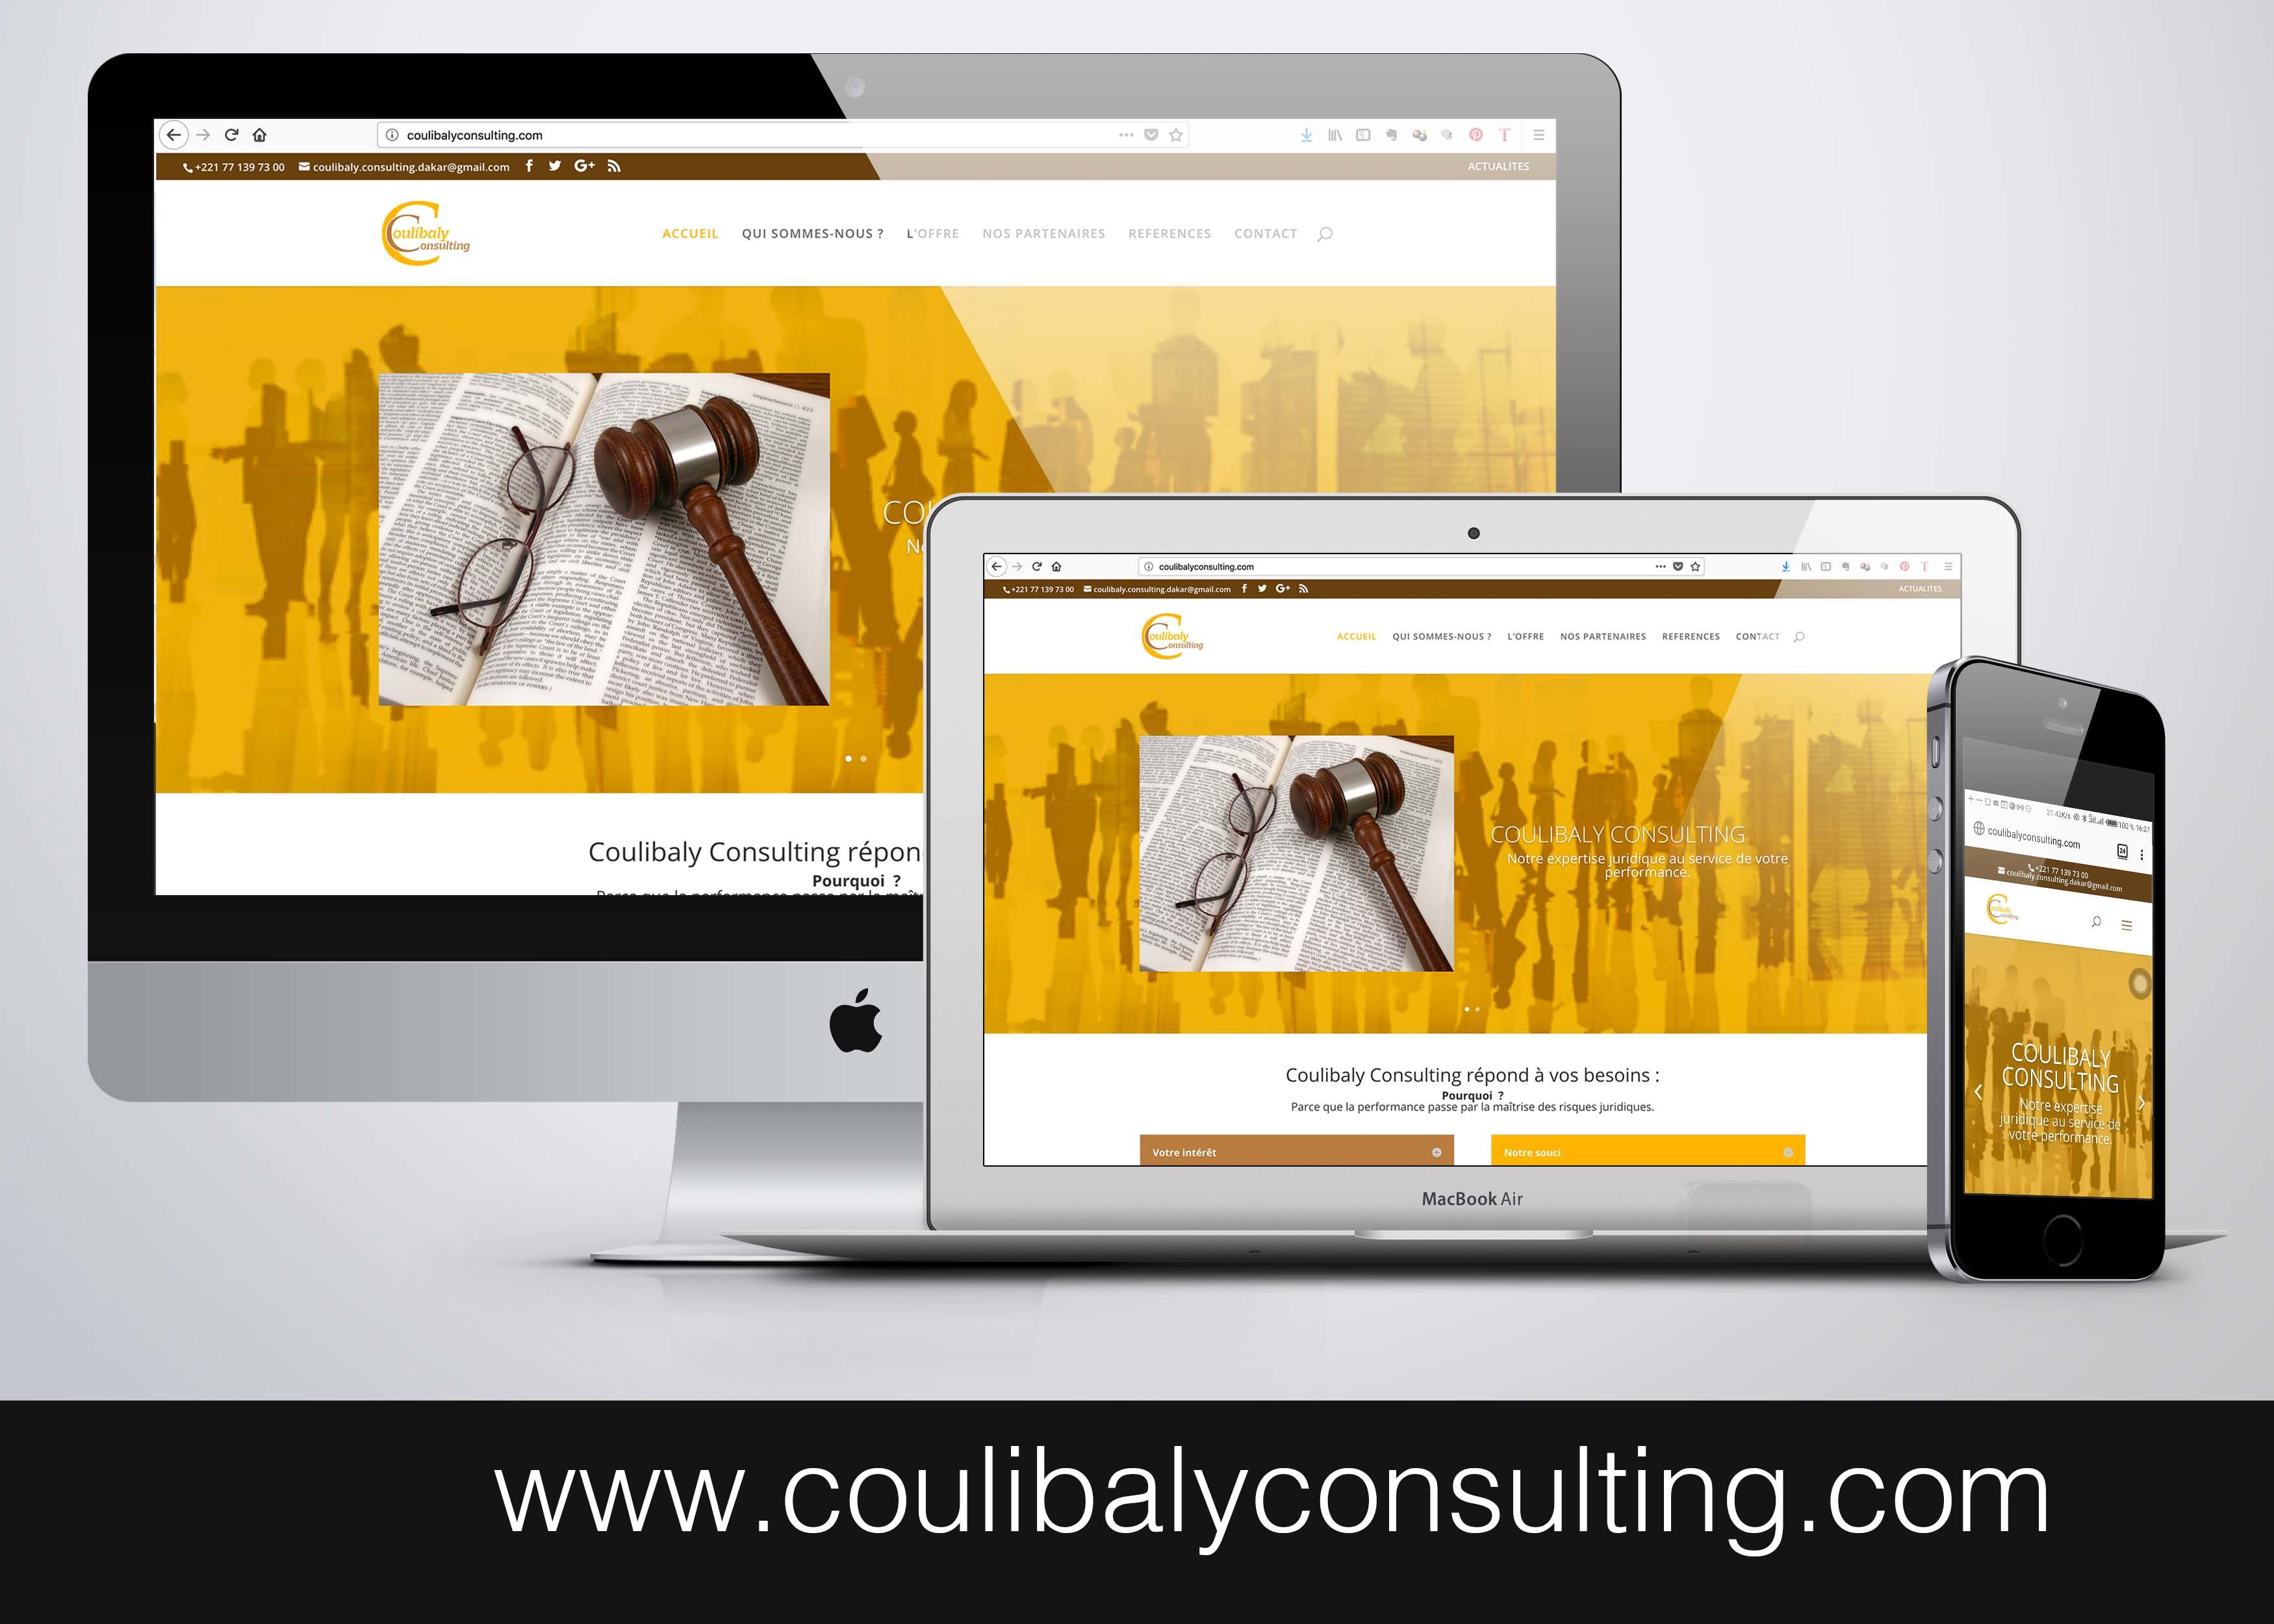 SITE WEB - www.coulibalyconsulting.com